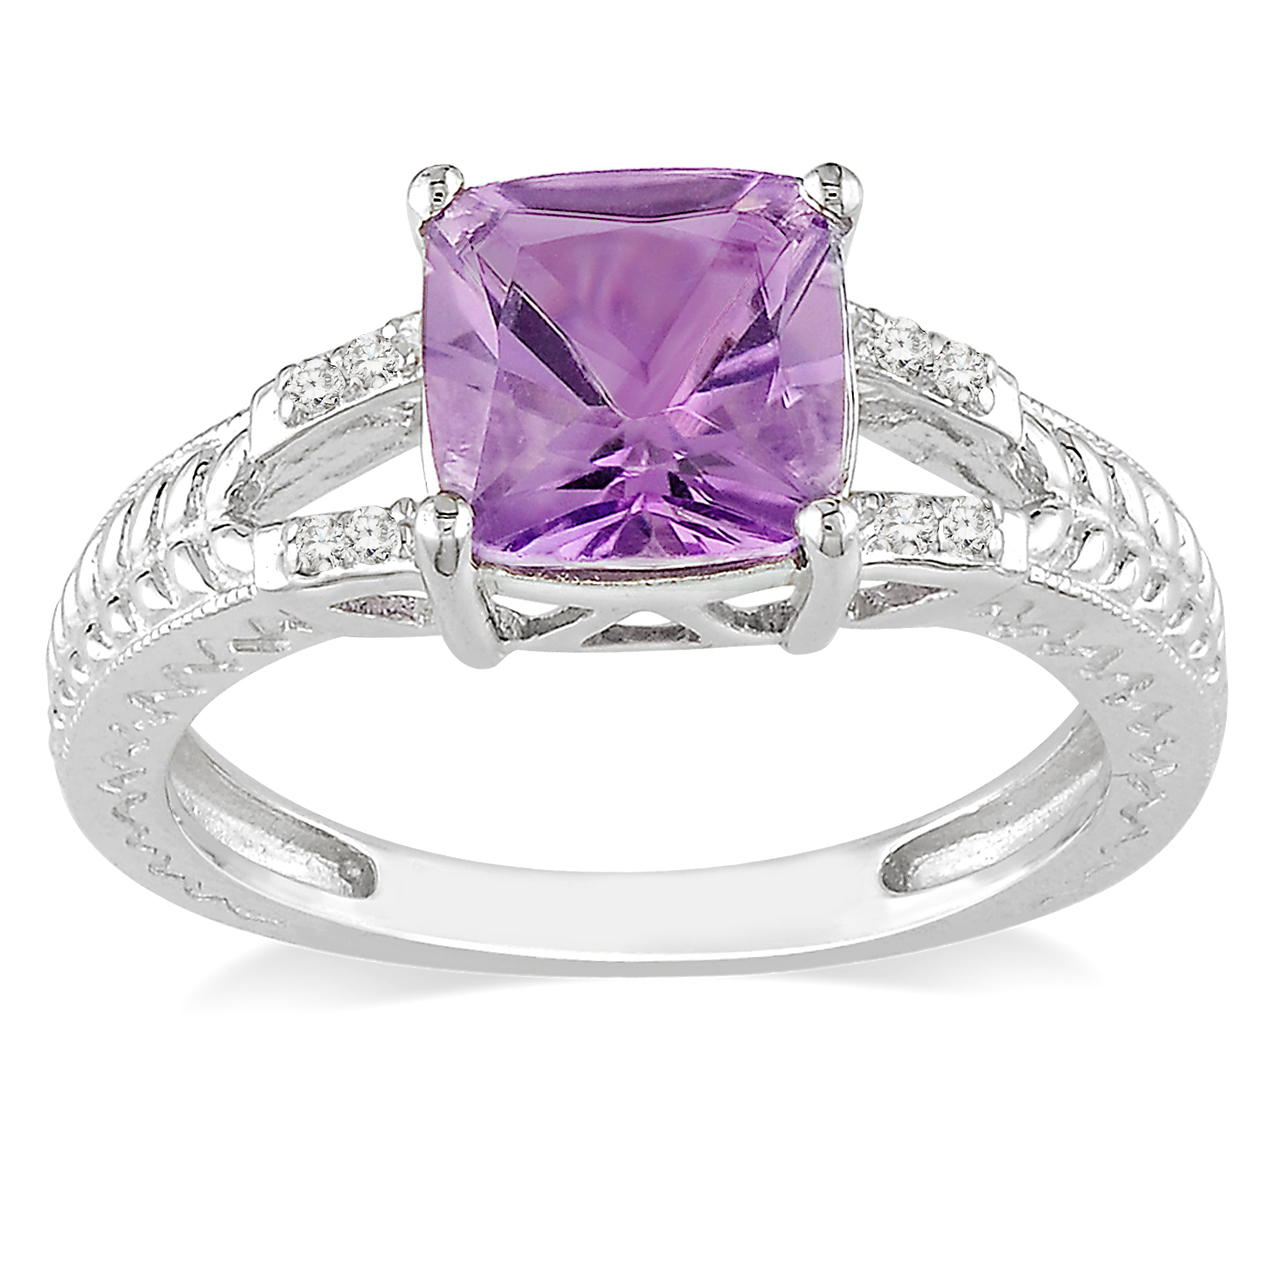 Amour 0.04 Carat T.W. Diamond and 1 3/4 Carat T.G.W. Amethyst Fashion Ring in Sterling Silver I3